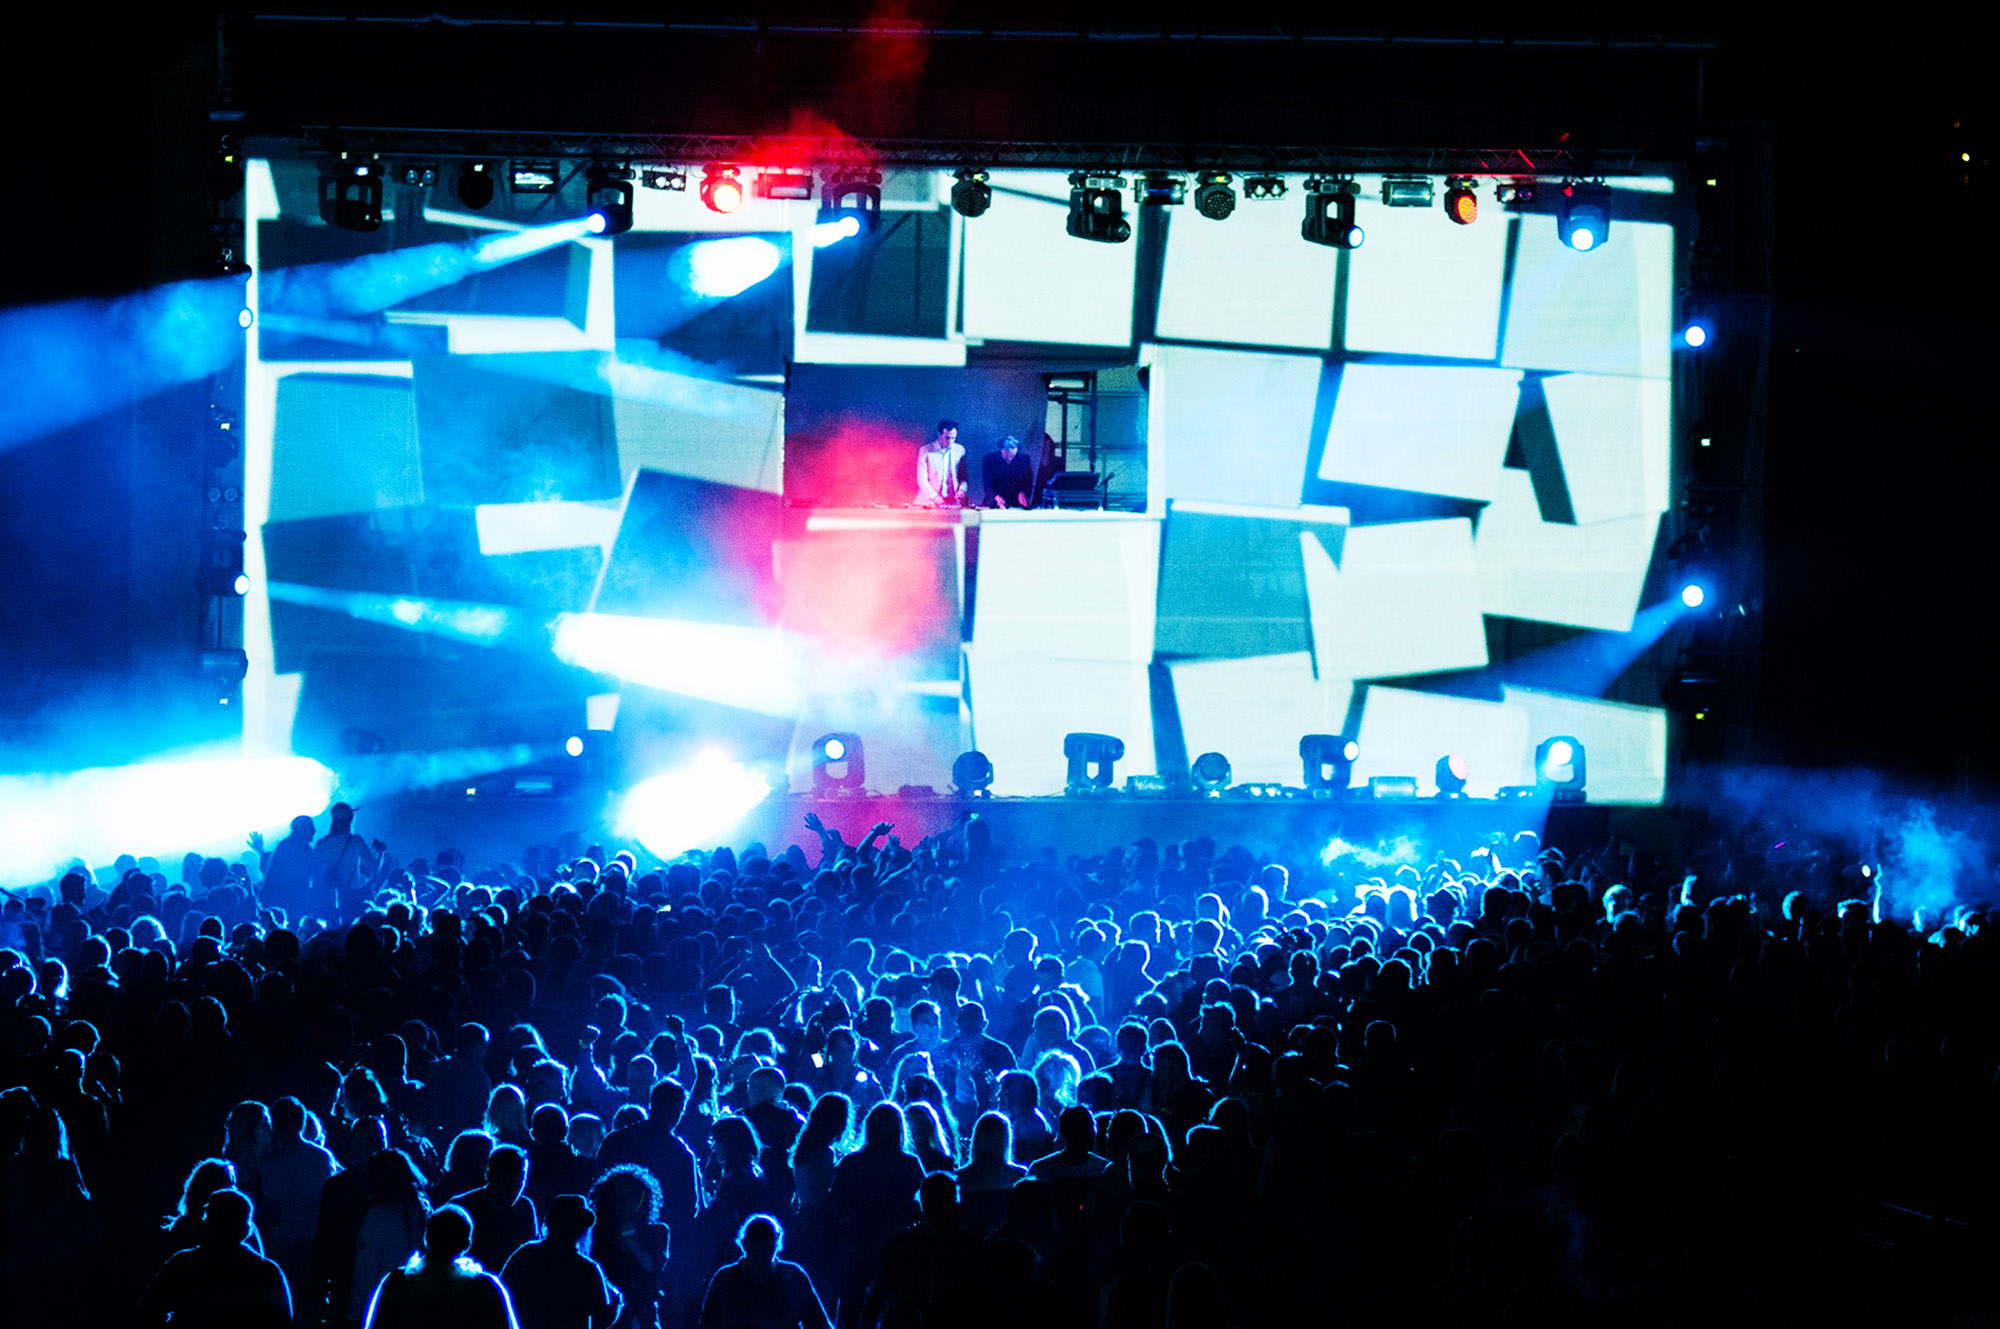 Groove music festival show projections, VJ set live